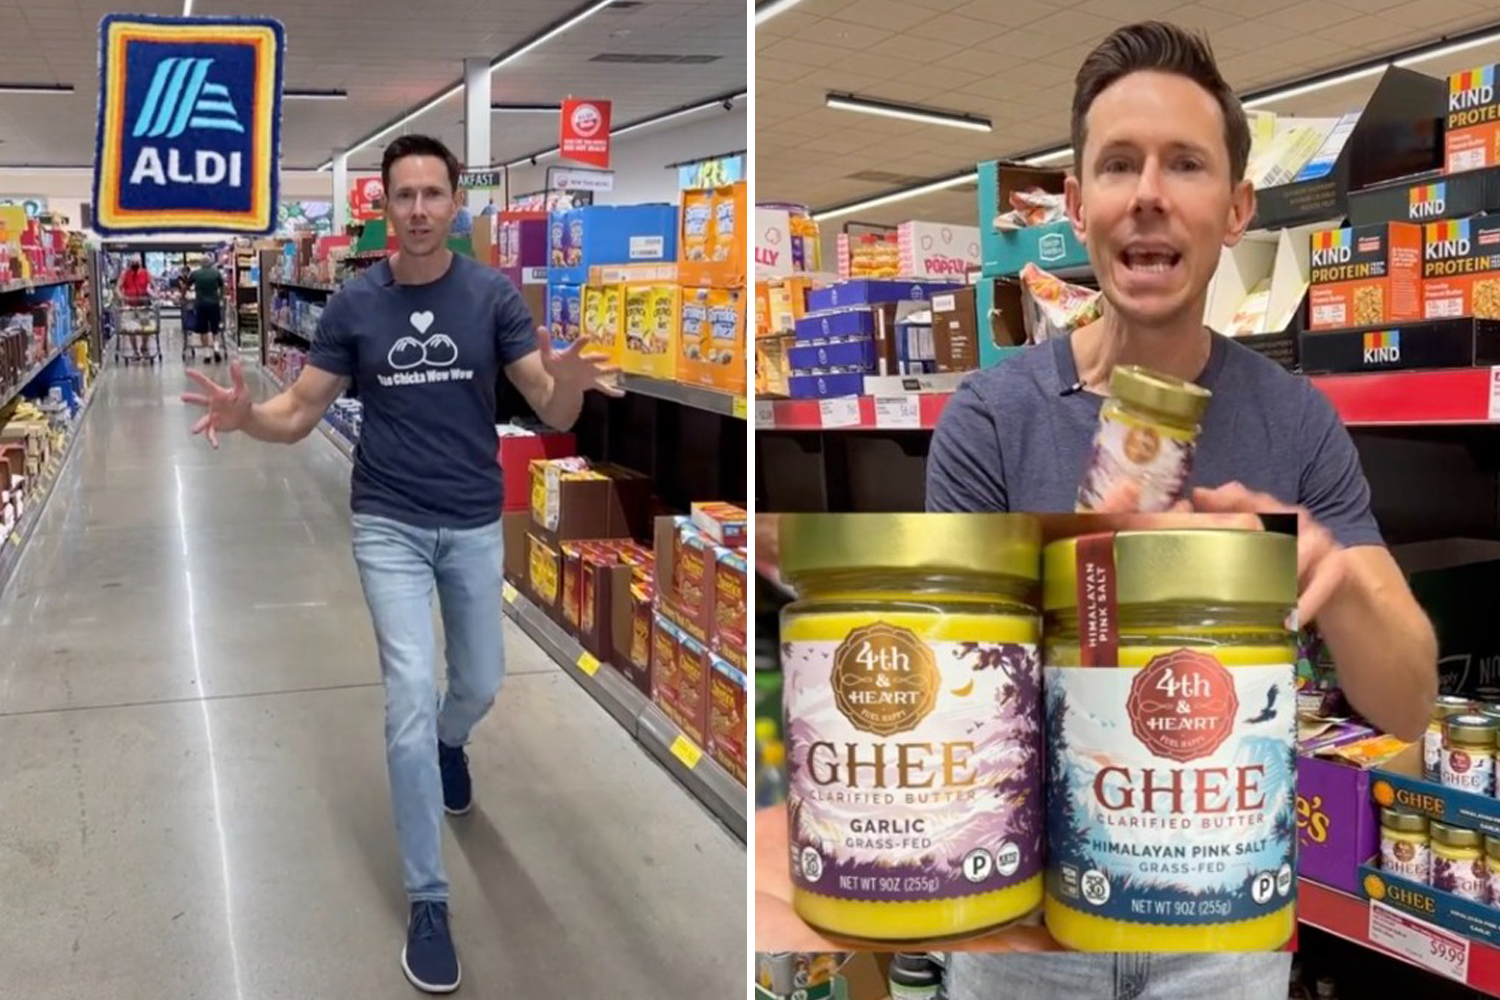 I'm a chef - this week’s Aldi finds are 'epic', see the best items from $2.70